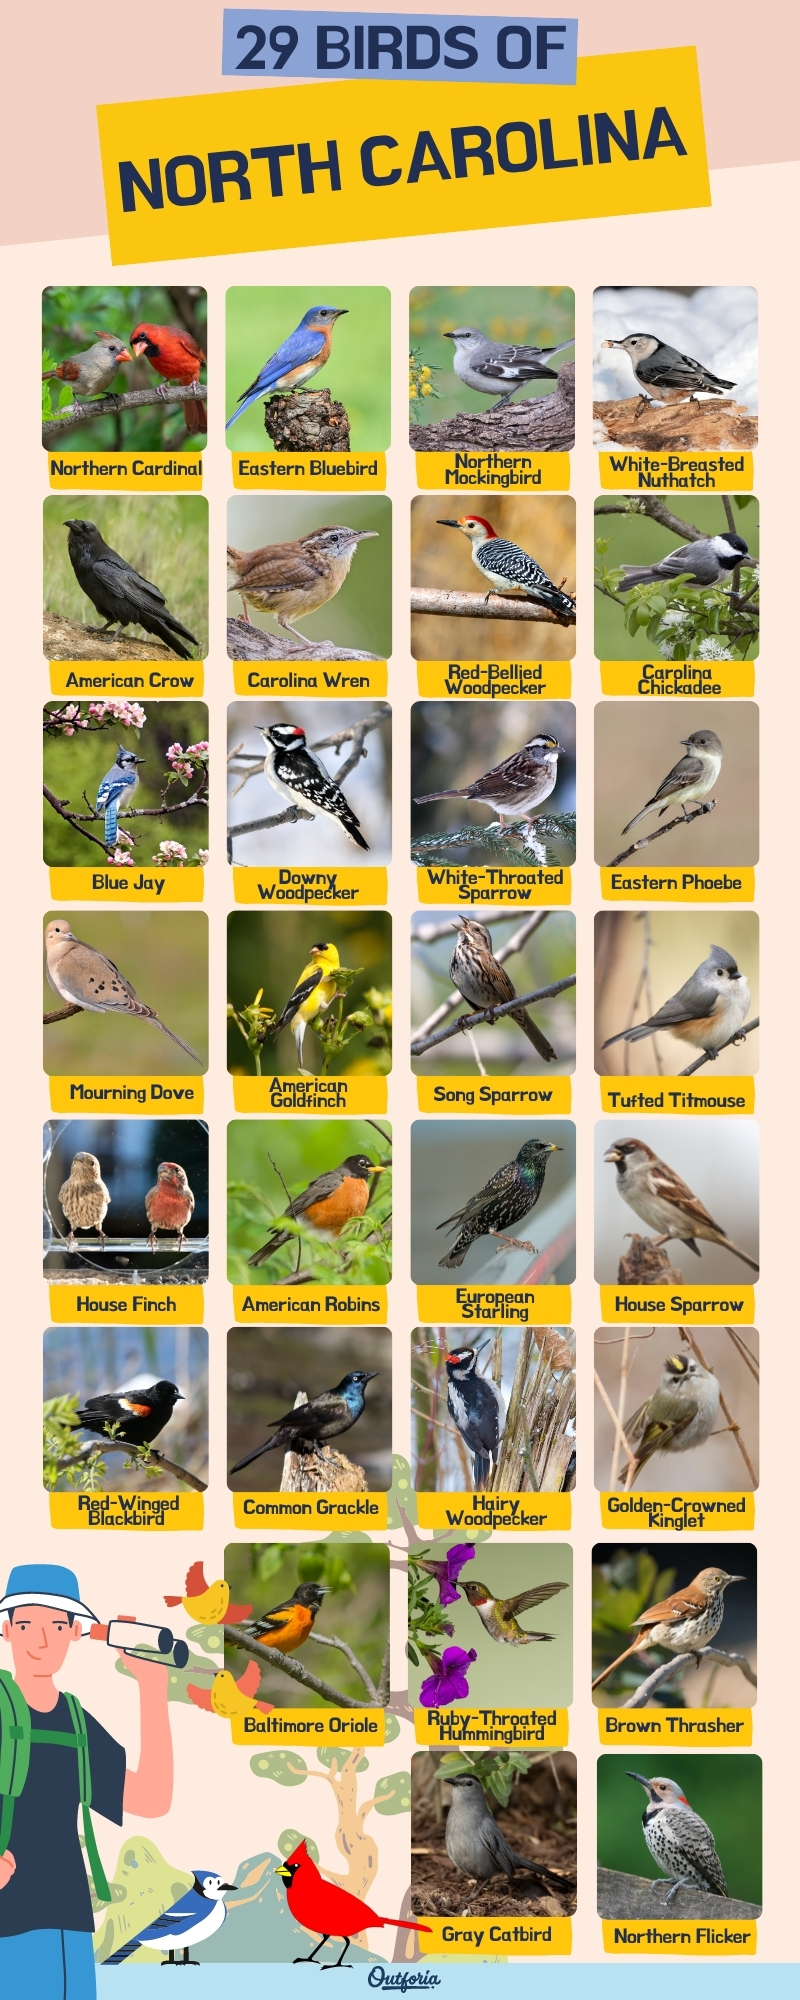 birds of North carolina chart with images and names